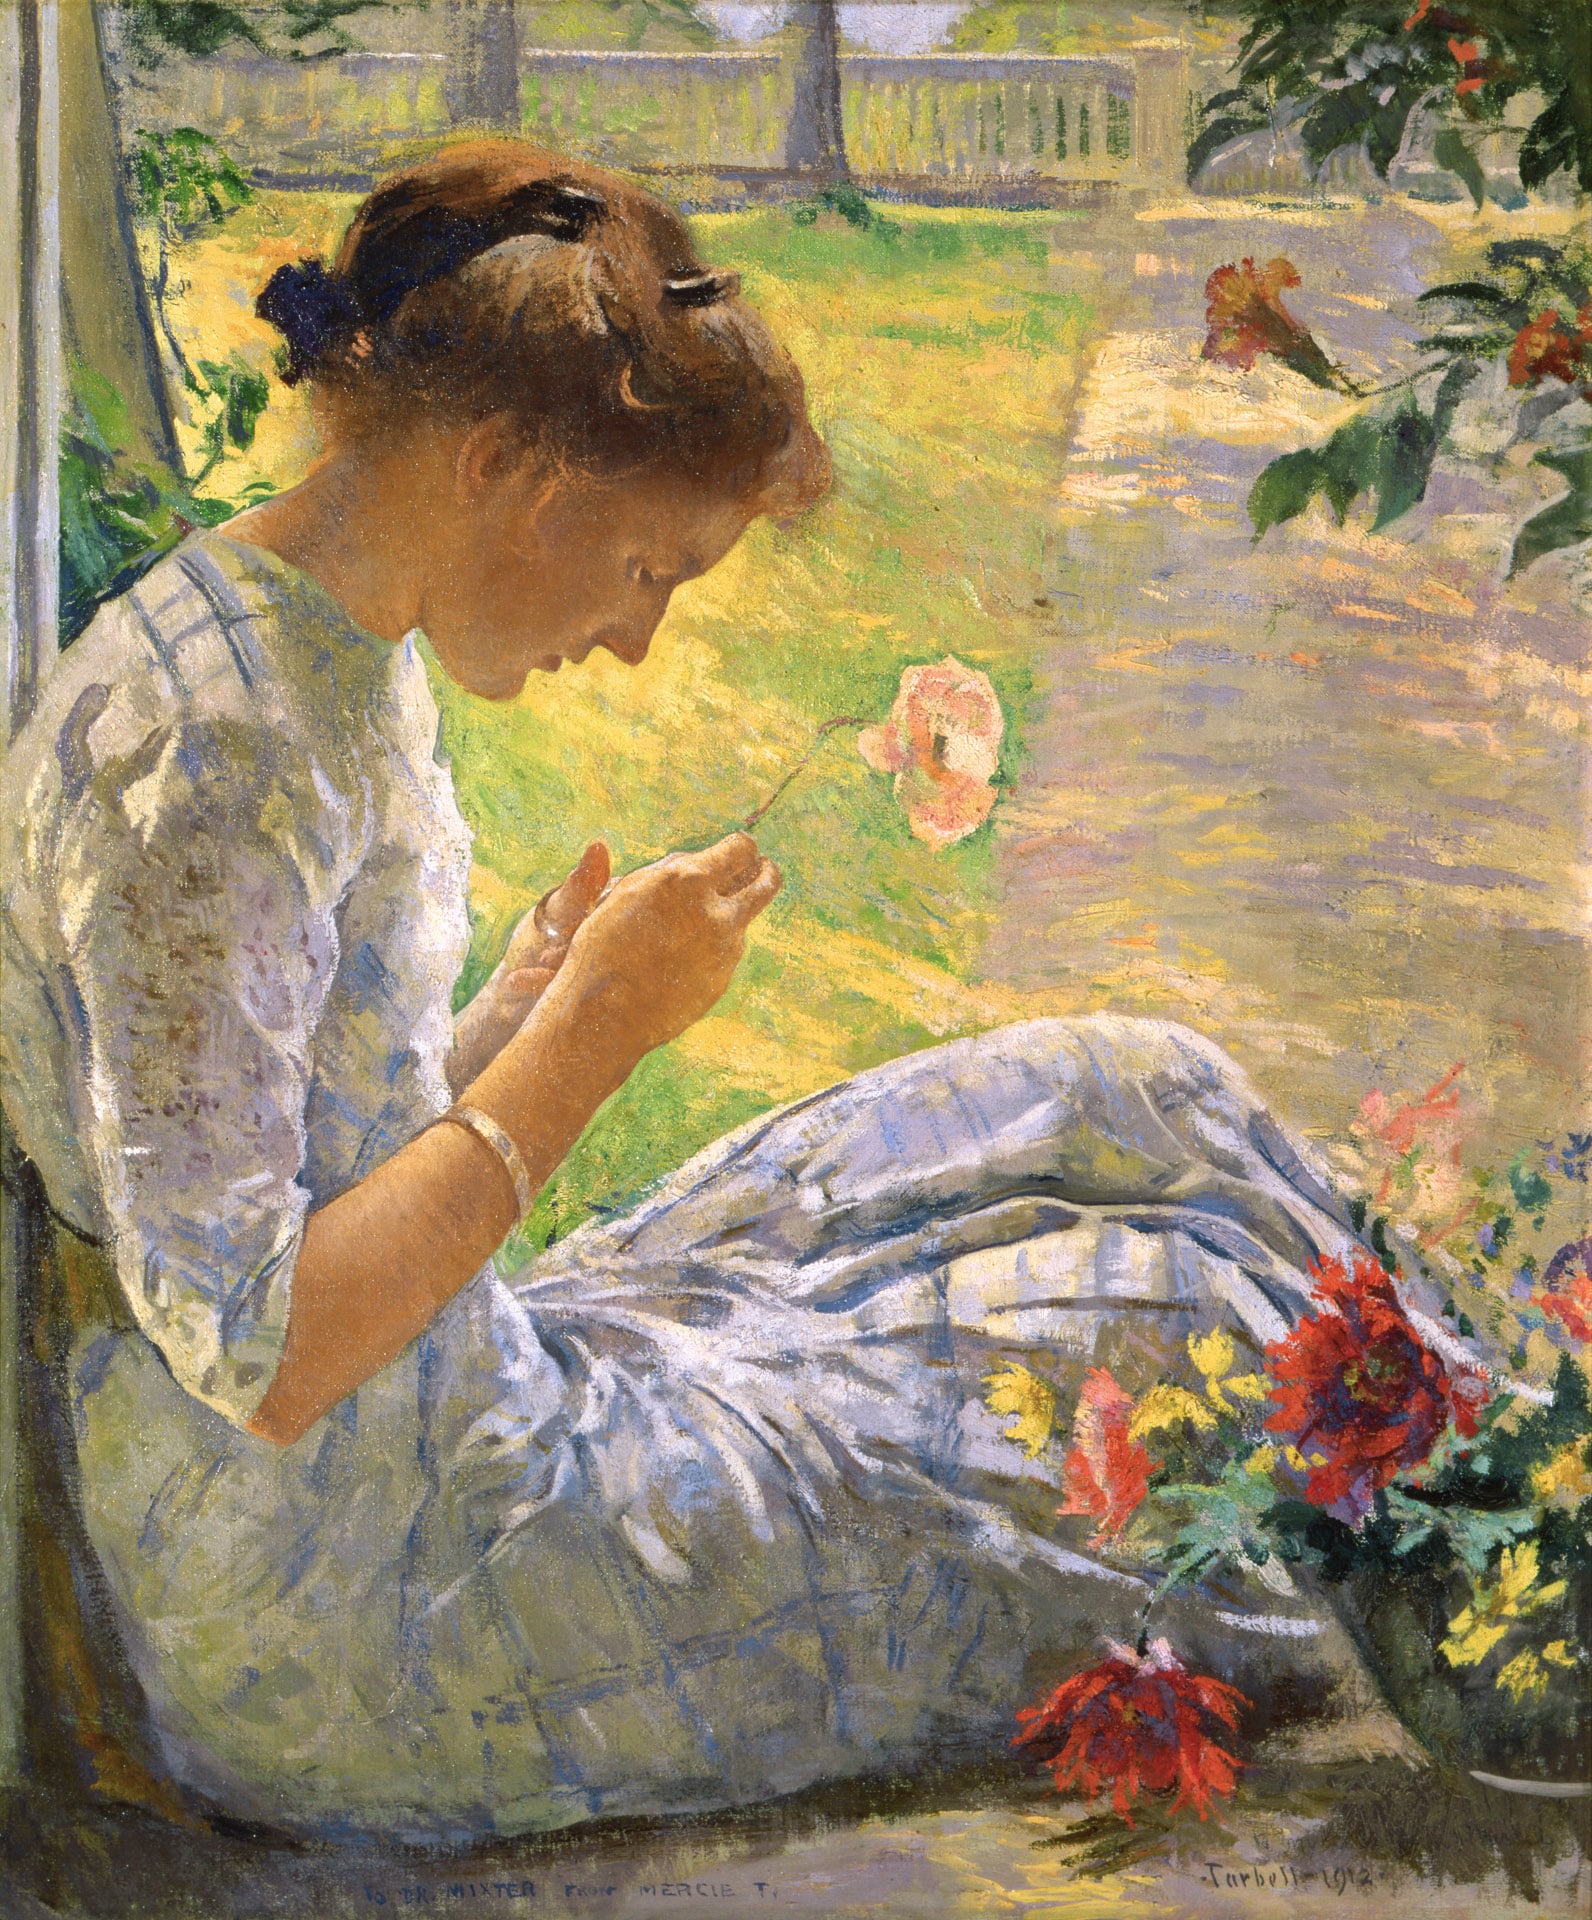 a painting of a girl sitting outside cutting a pink flower with a basket of flowers next to her